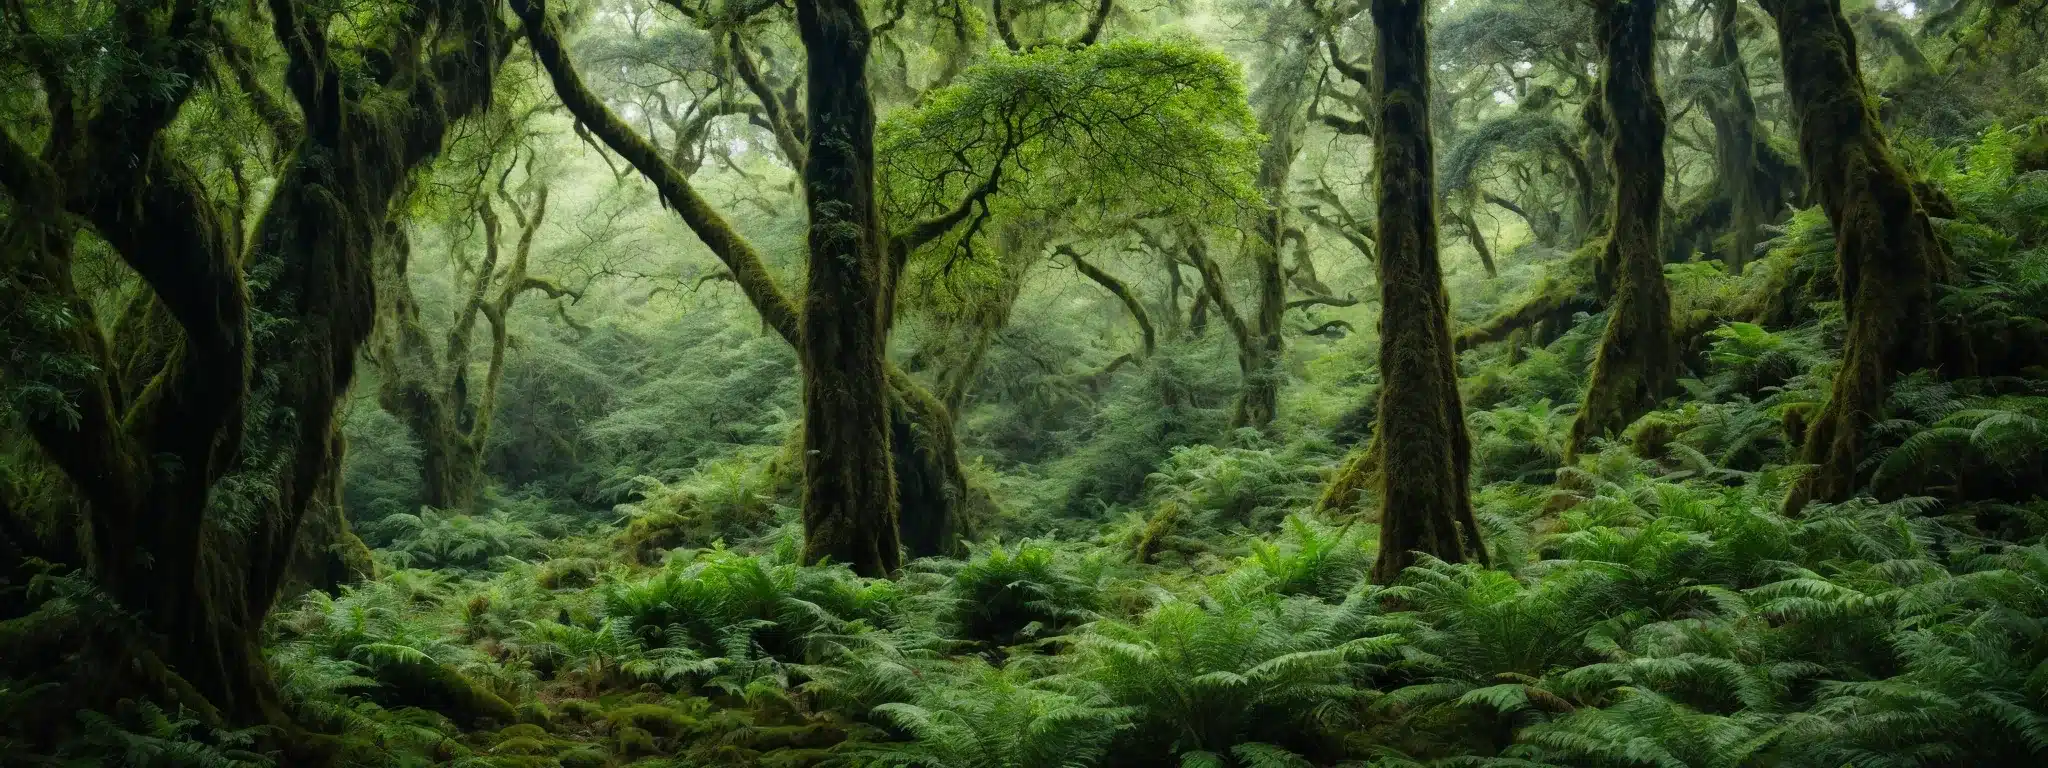 A Lush, Green Forest With A Prominent, Flourishing Tree Standing Taller Than Surrounding Foliage.